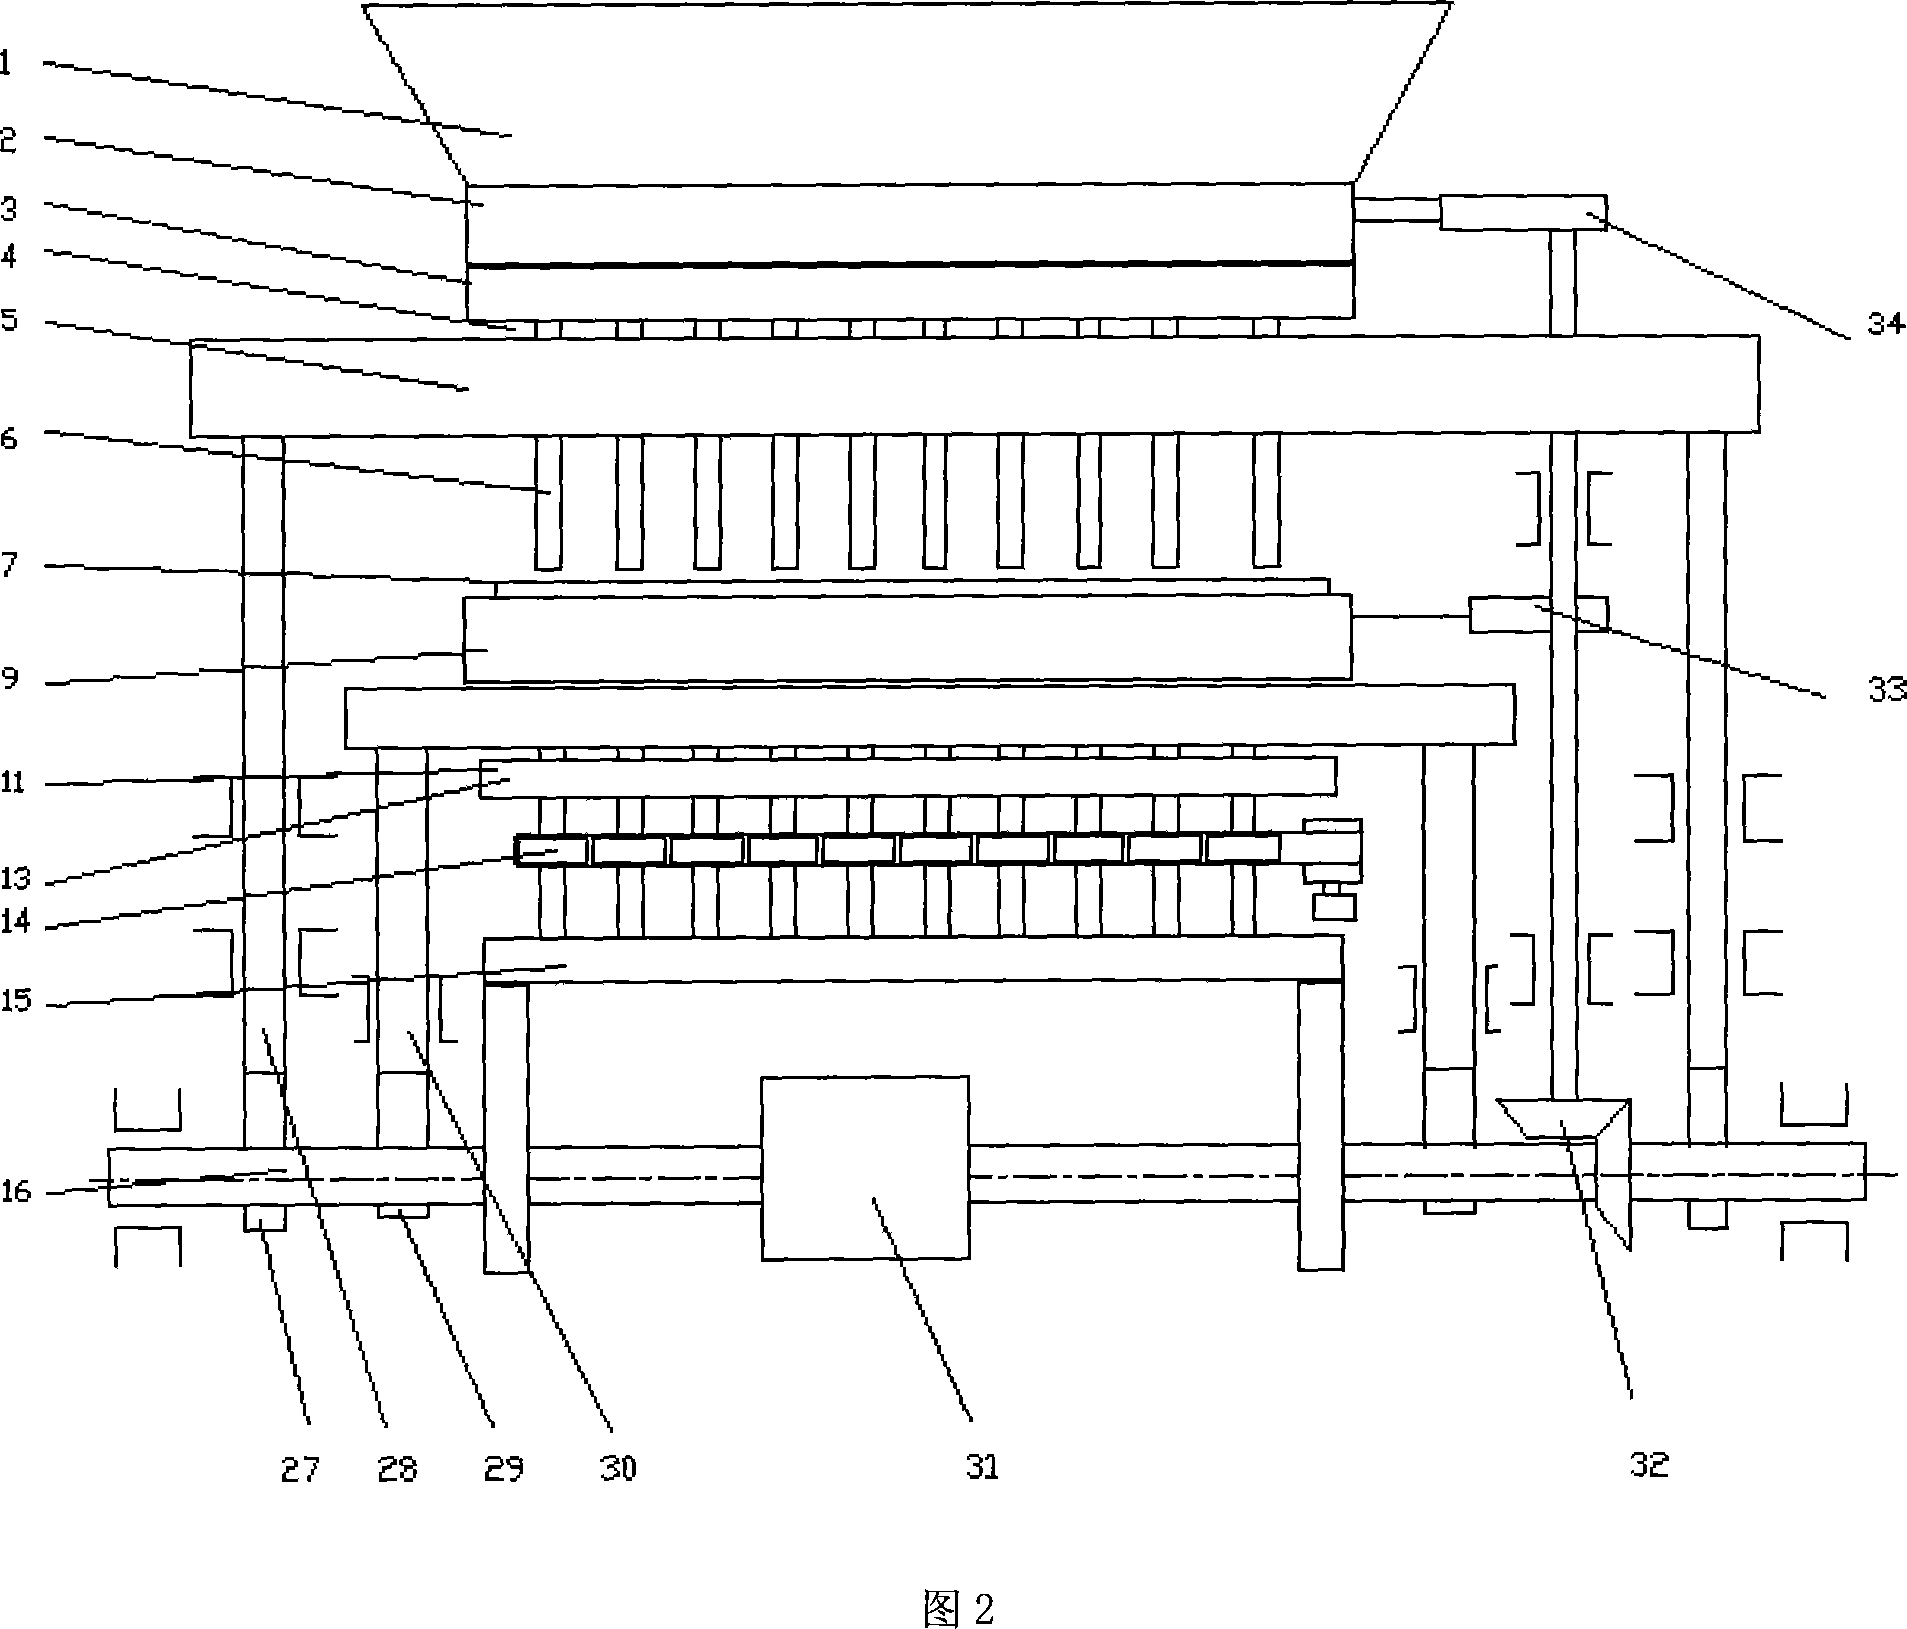 Automatically formed packaging method apparatus for throwing firecrackers